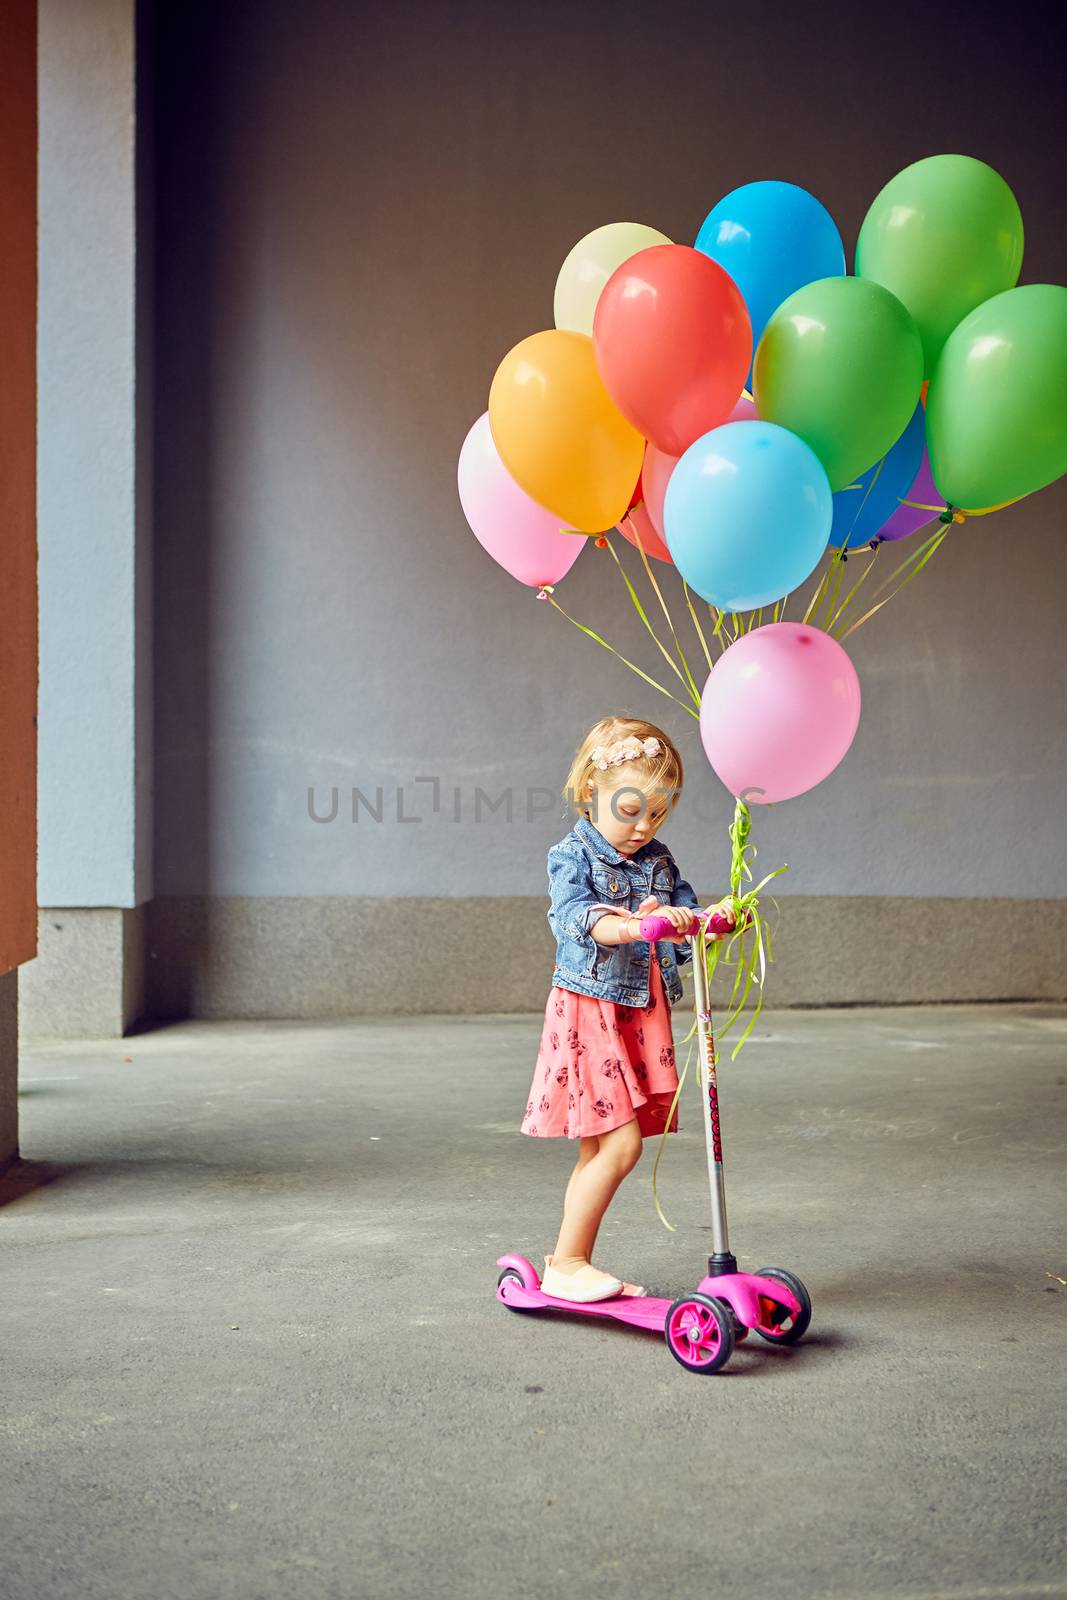 happy little girl outdoors with balloons by sarymsakov